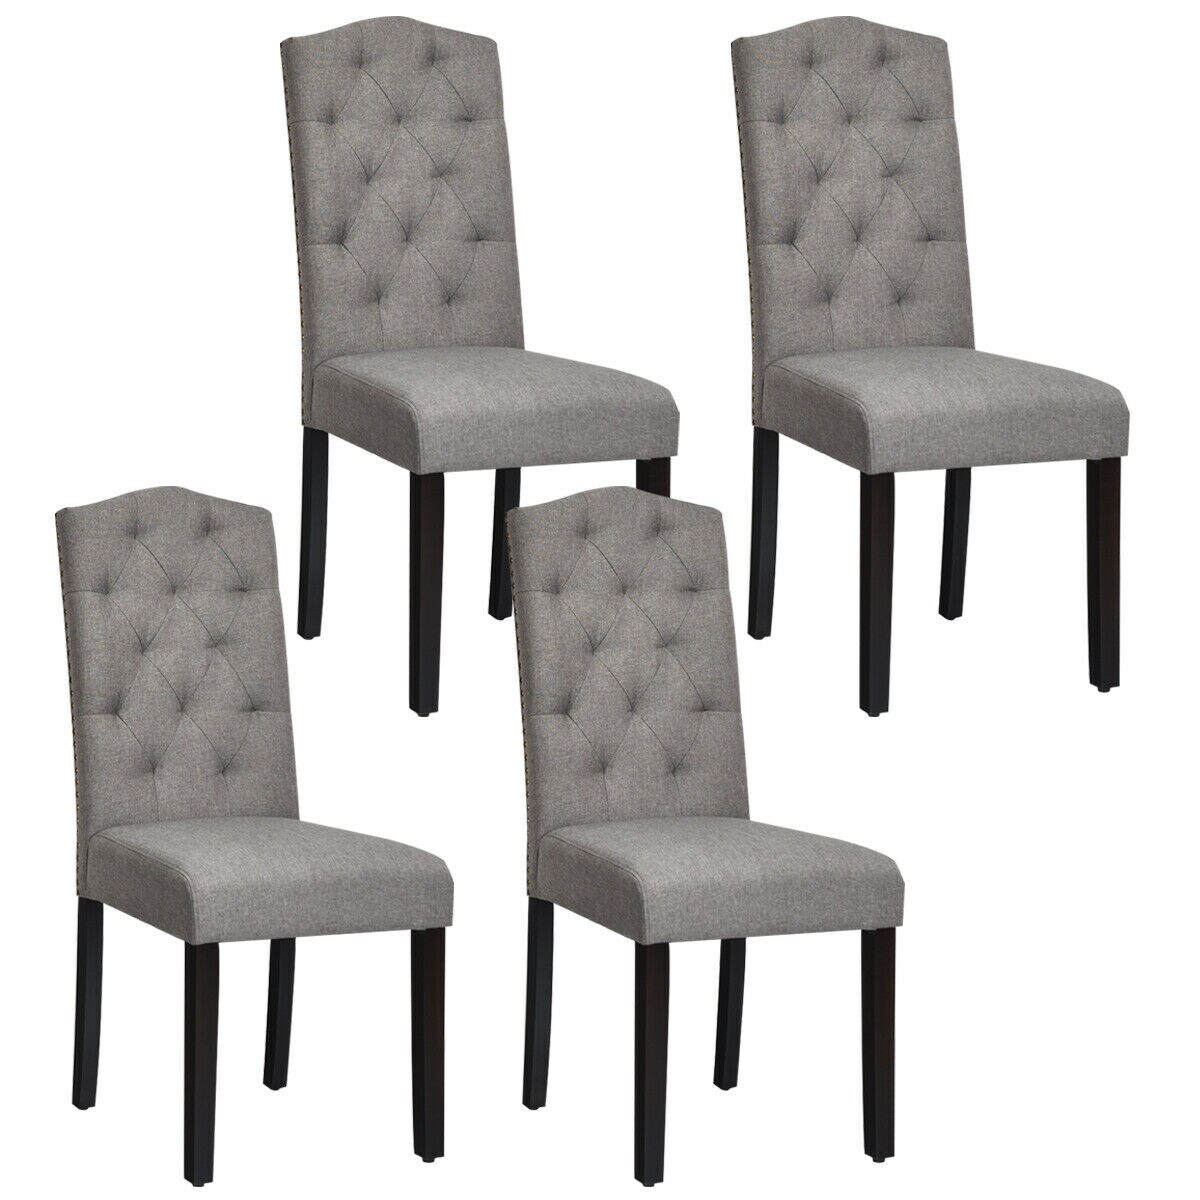 Gymax Set of 4 Tufted Dining Chair Upholstered w/ Nailhead Trim and Rubber Wooden Legs